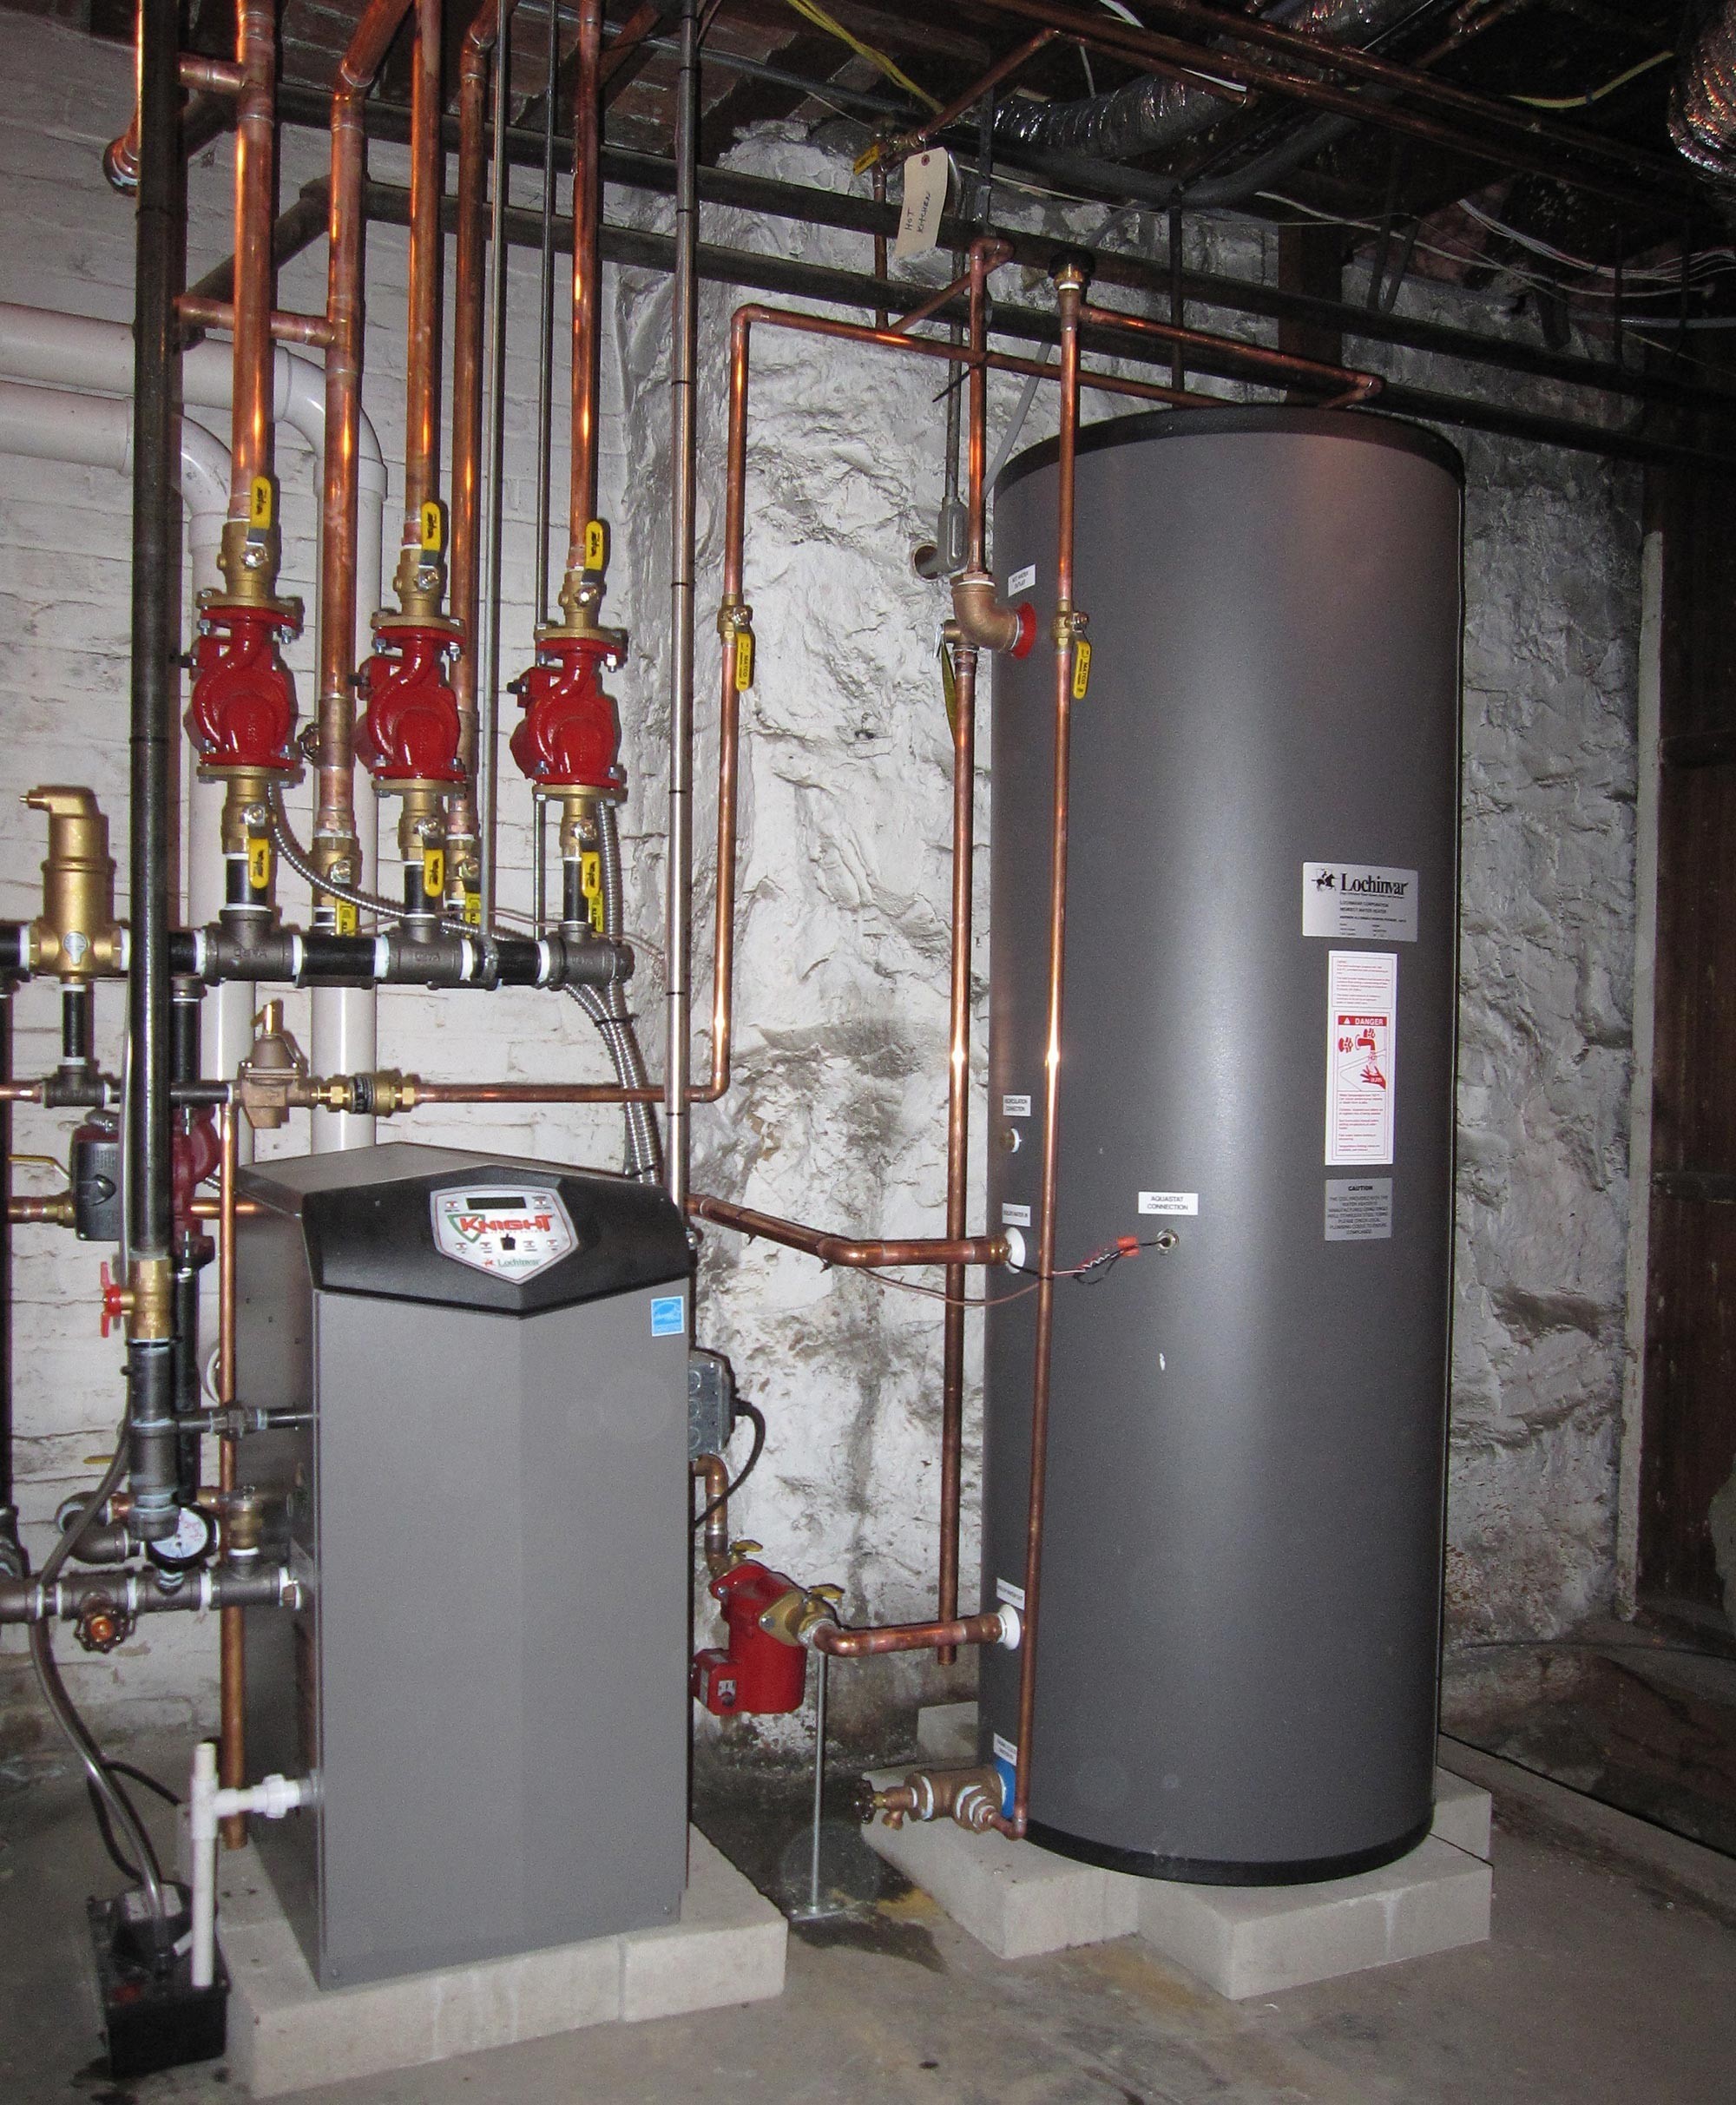 Floor Mounted High Eff FHW Gas Boiler with Indirect HW Tank and Unico High Velocity AC System